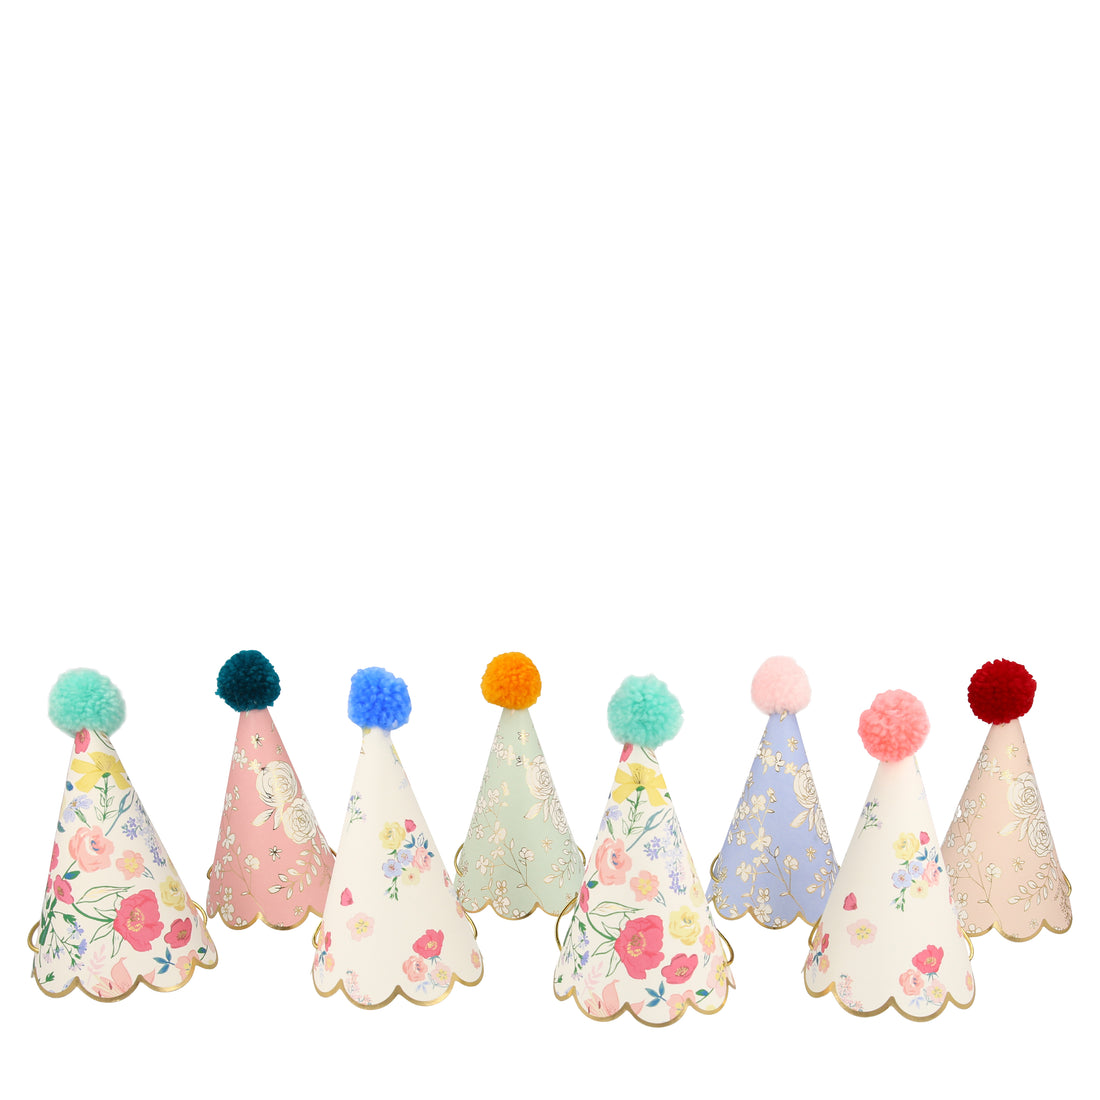 english garden party hats (8 pack)